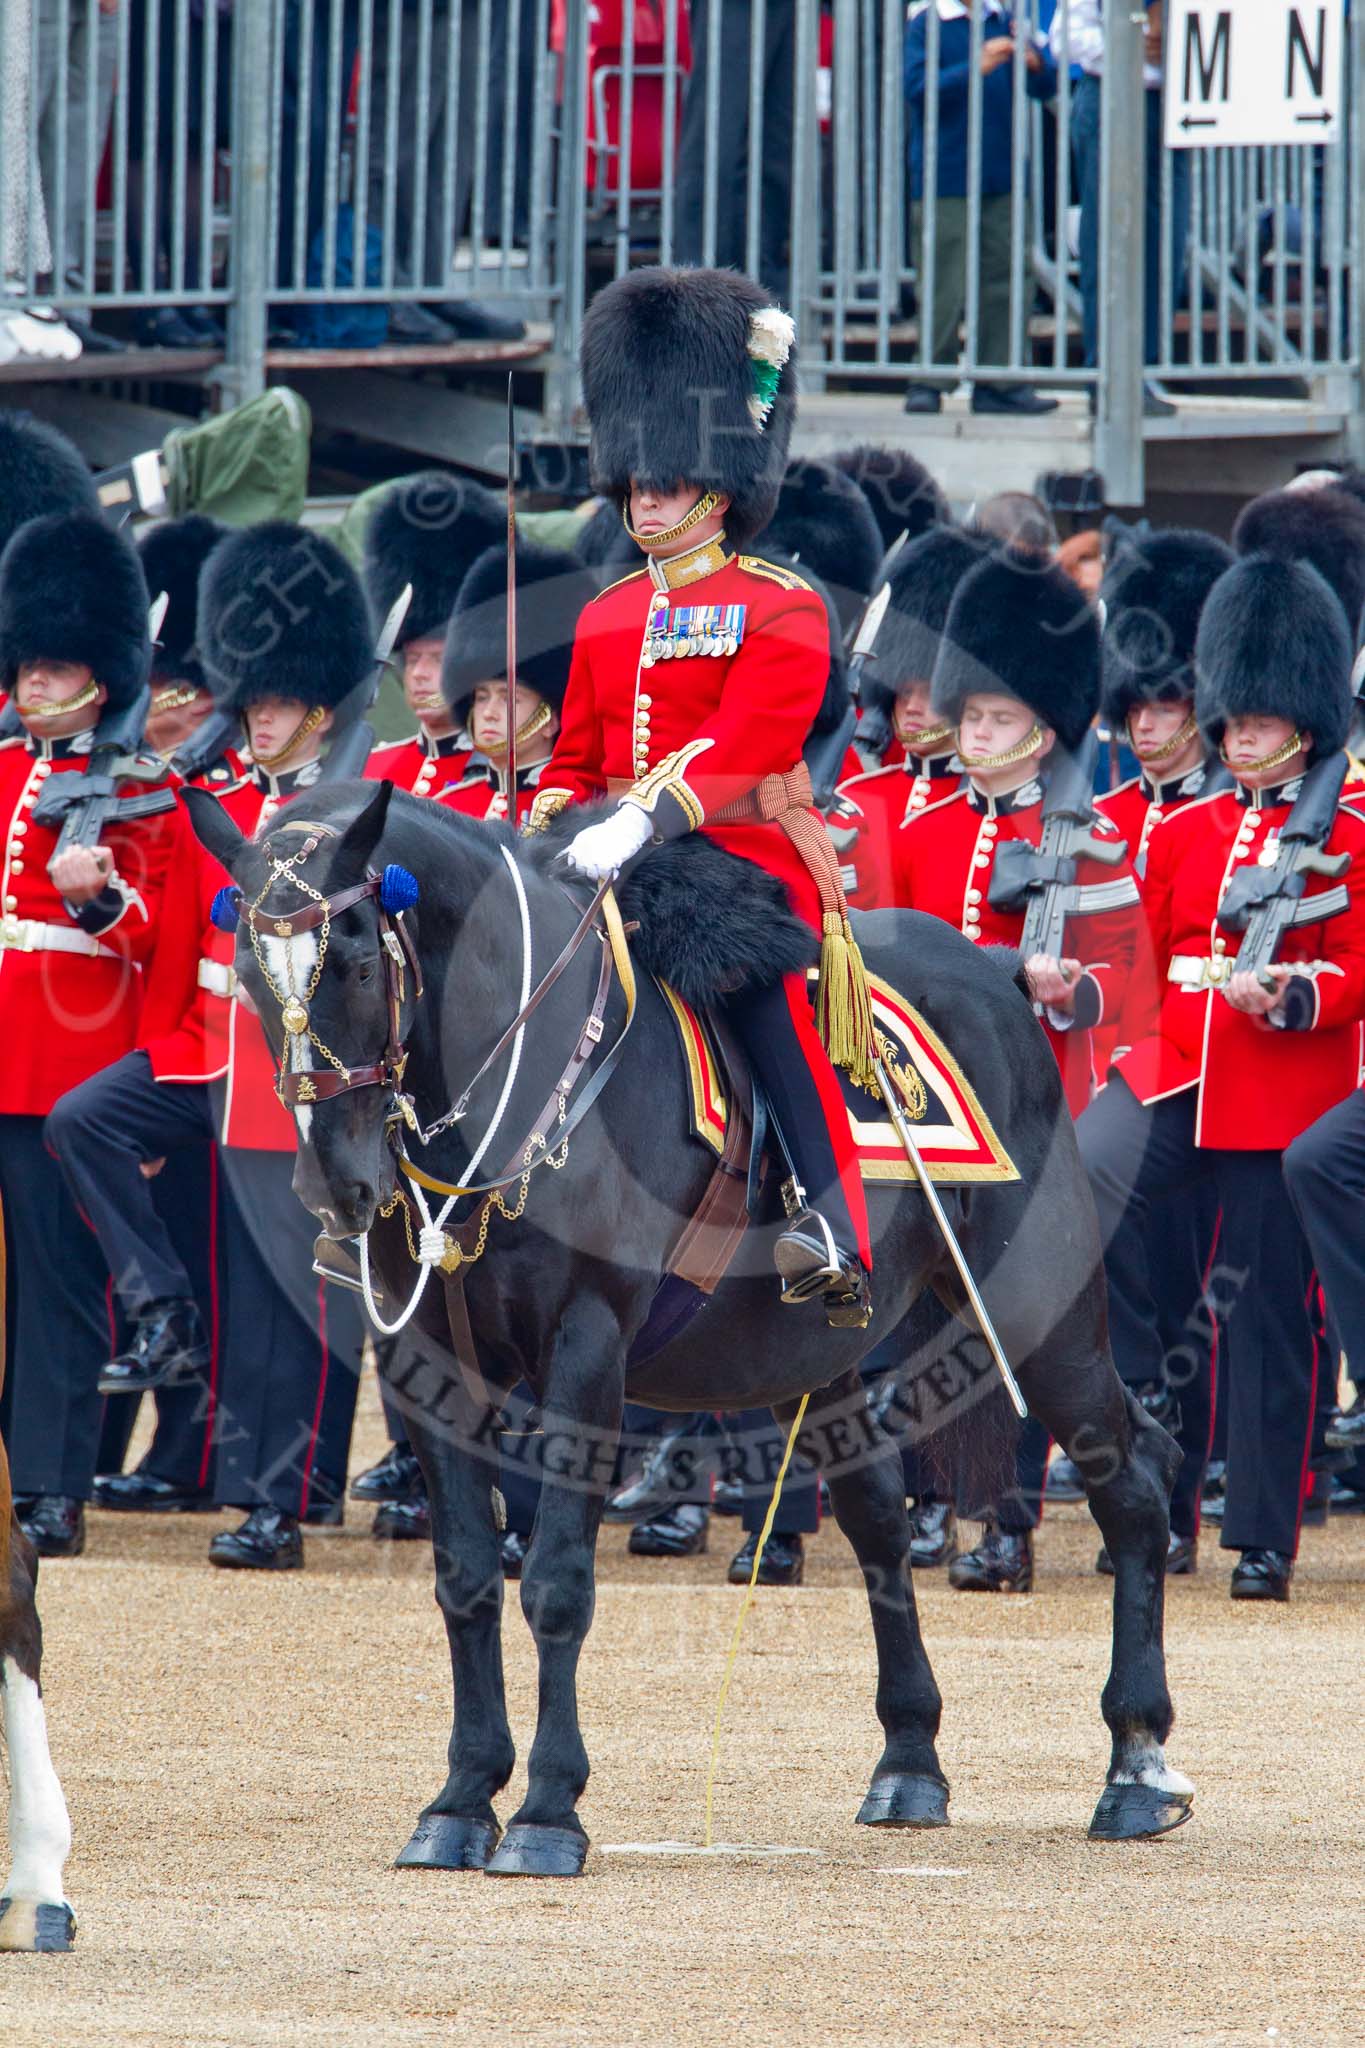 Trooping the Colour 2011: The Major of the Parade, Major Benedict Peter Norman Ramsay, Welsh Guards..
Horse Guards Parade, Westminster,
London SW1,
Greater London,
United Kingdom,
on 11 June 2011 at 11:33, image #228